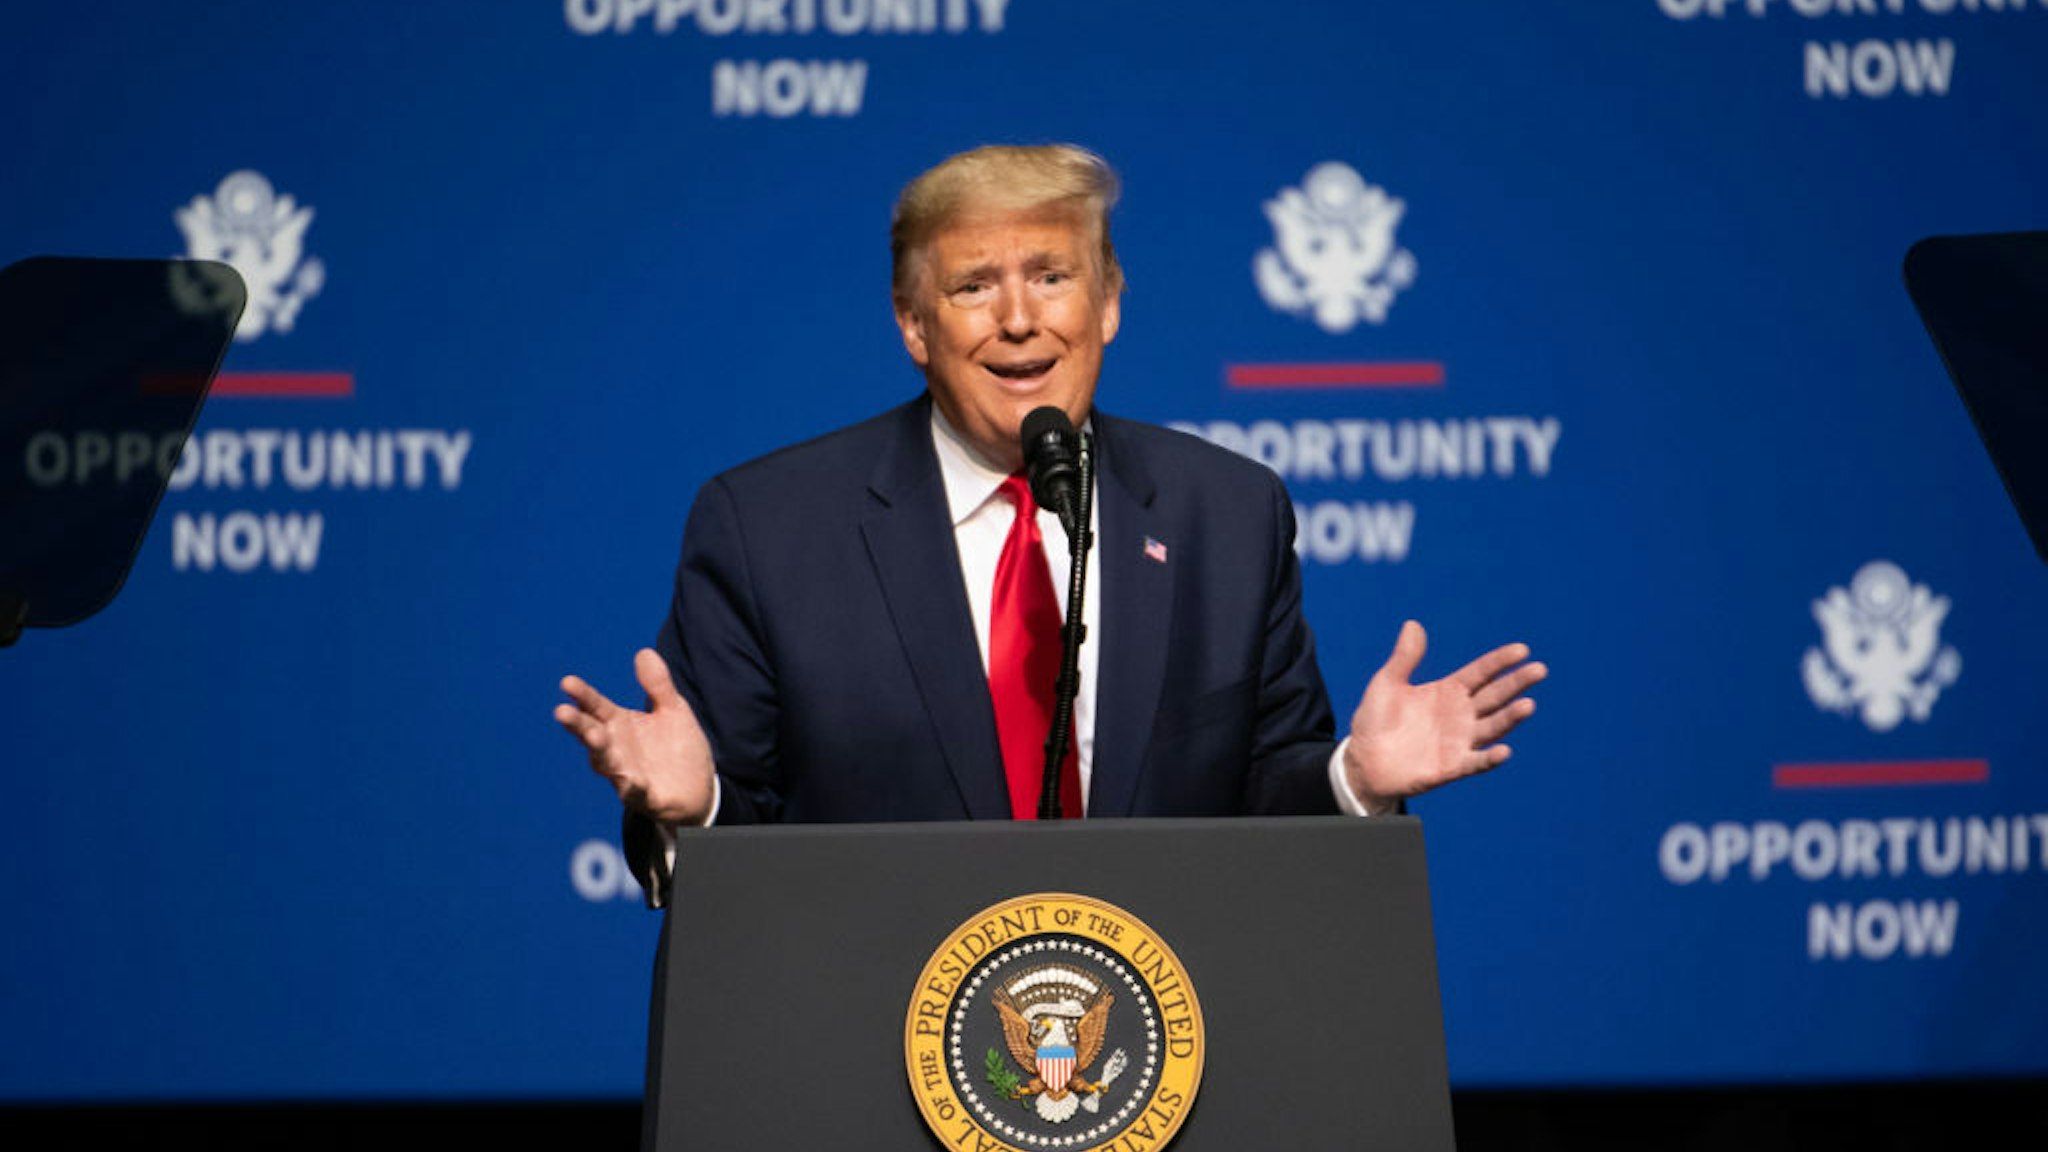 President Donald Trump addresses the crowd during the Opportunity Now summit at Central Piedmont Community College on February 7, 2020 in Charlotte, North Carolina.